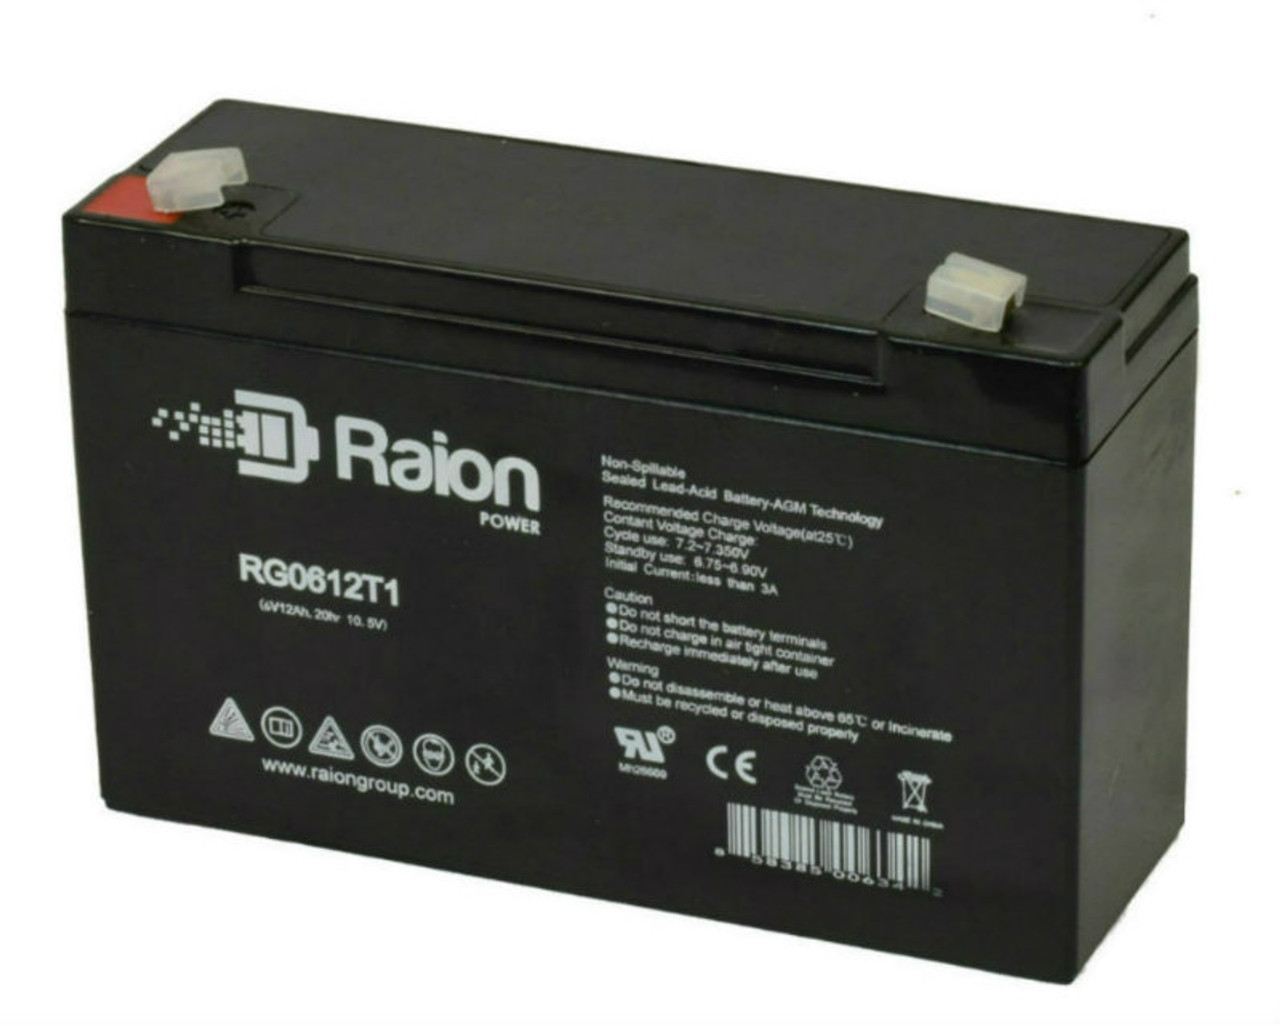 Raion Power RG06120T1 Replacement 6V 12Ah Emergency Light Battery for Light Alarms PGPA